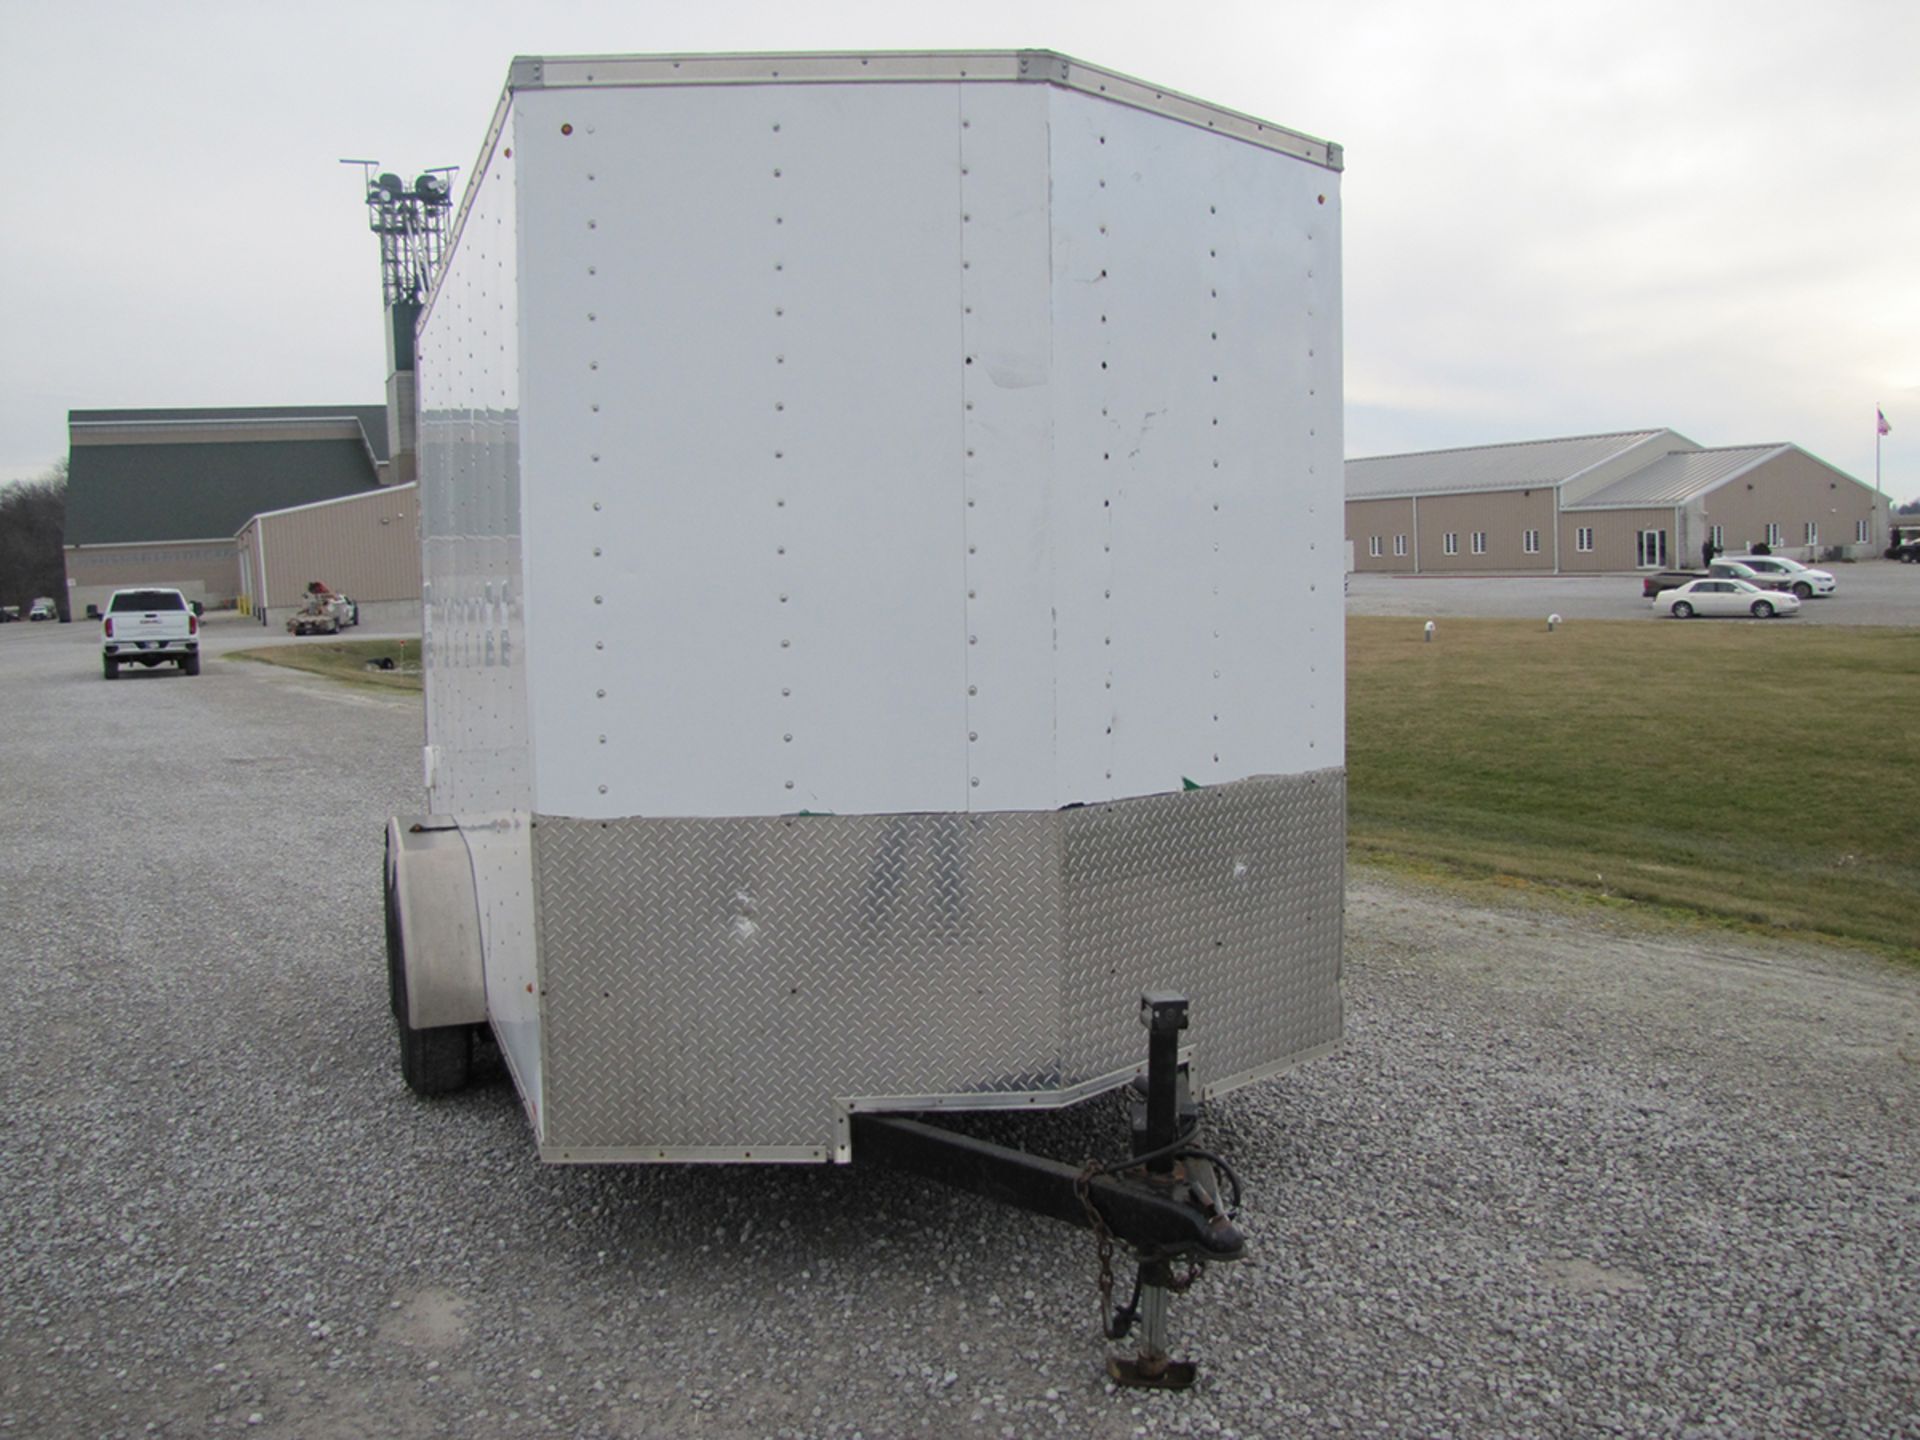 2013 12’ Look bumper-pull trailers - Image 7 of 20